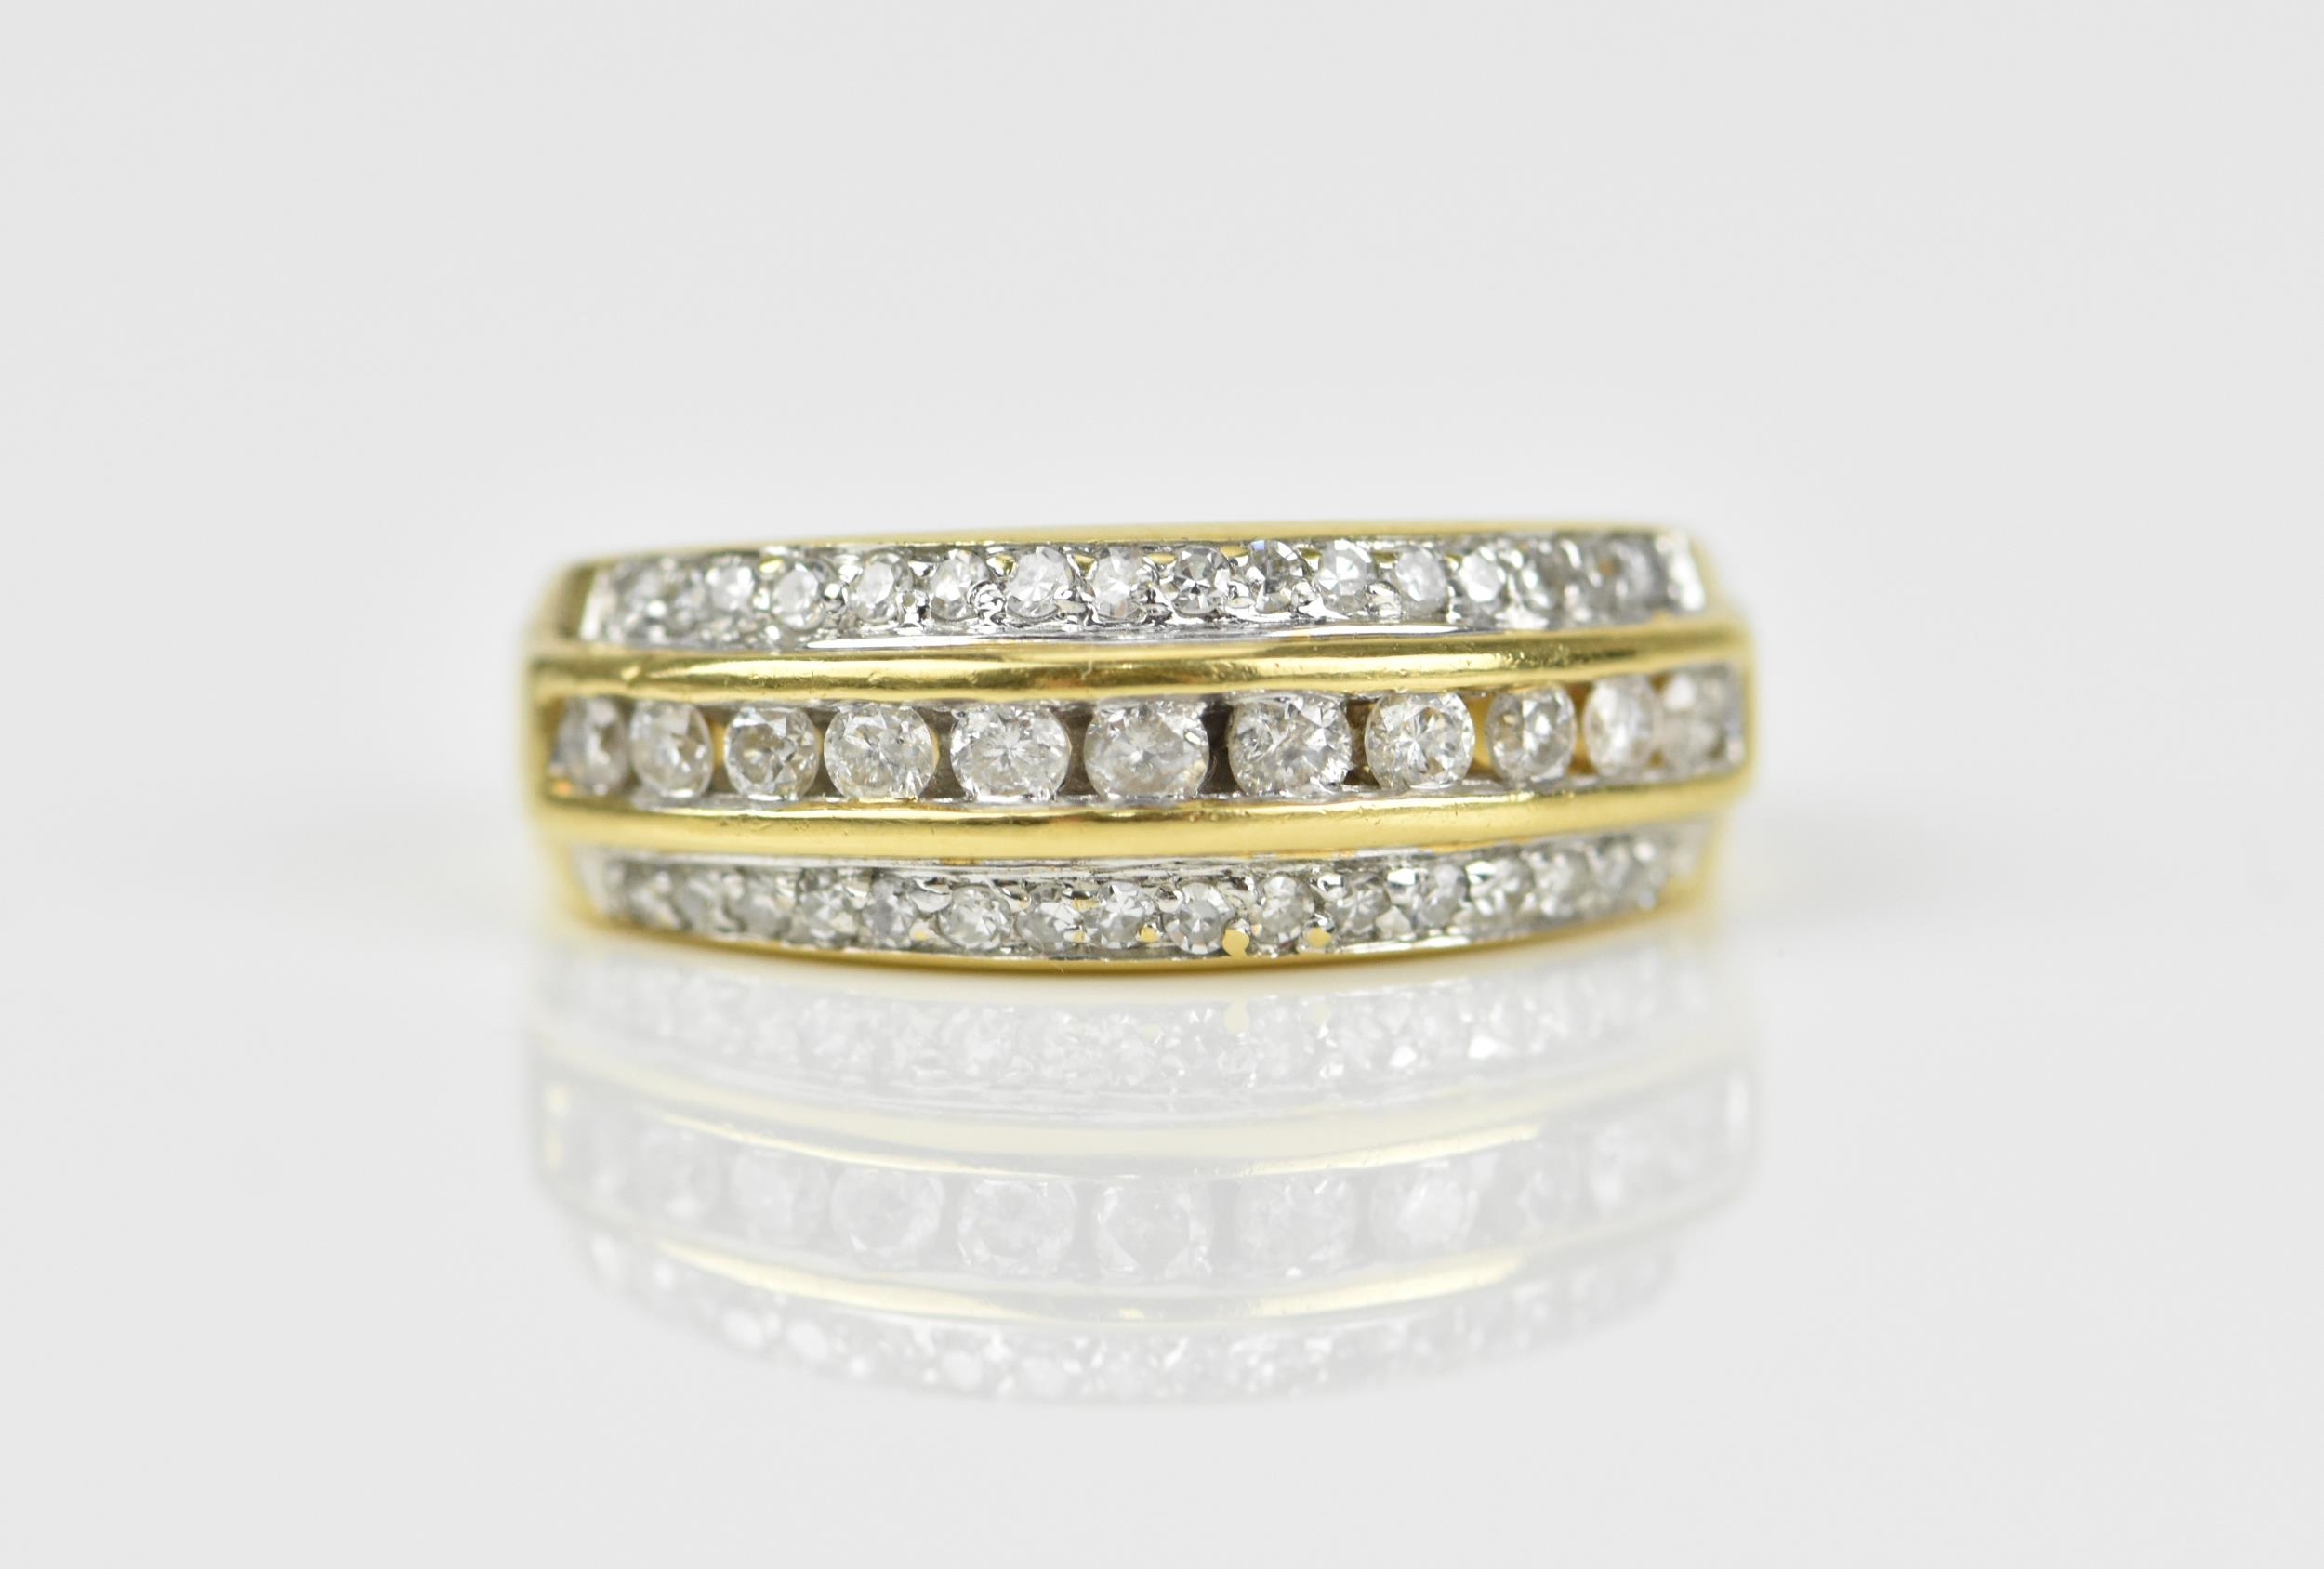 An 18ct yellow gold and diamond three row ring, set with a central row of brilliant cut channel